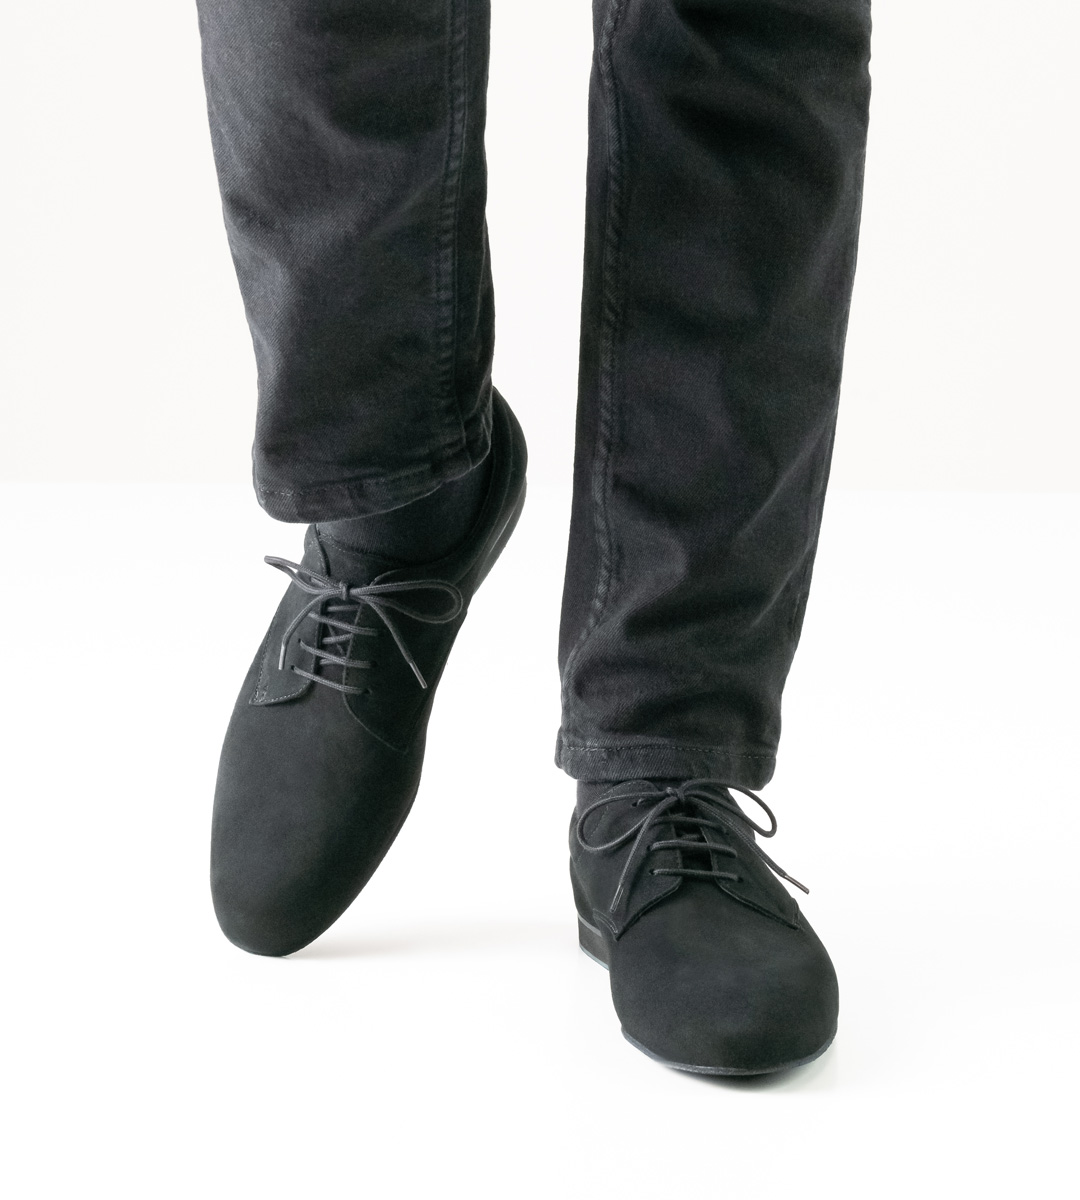 black men's dance shoe in combination with black trousers